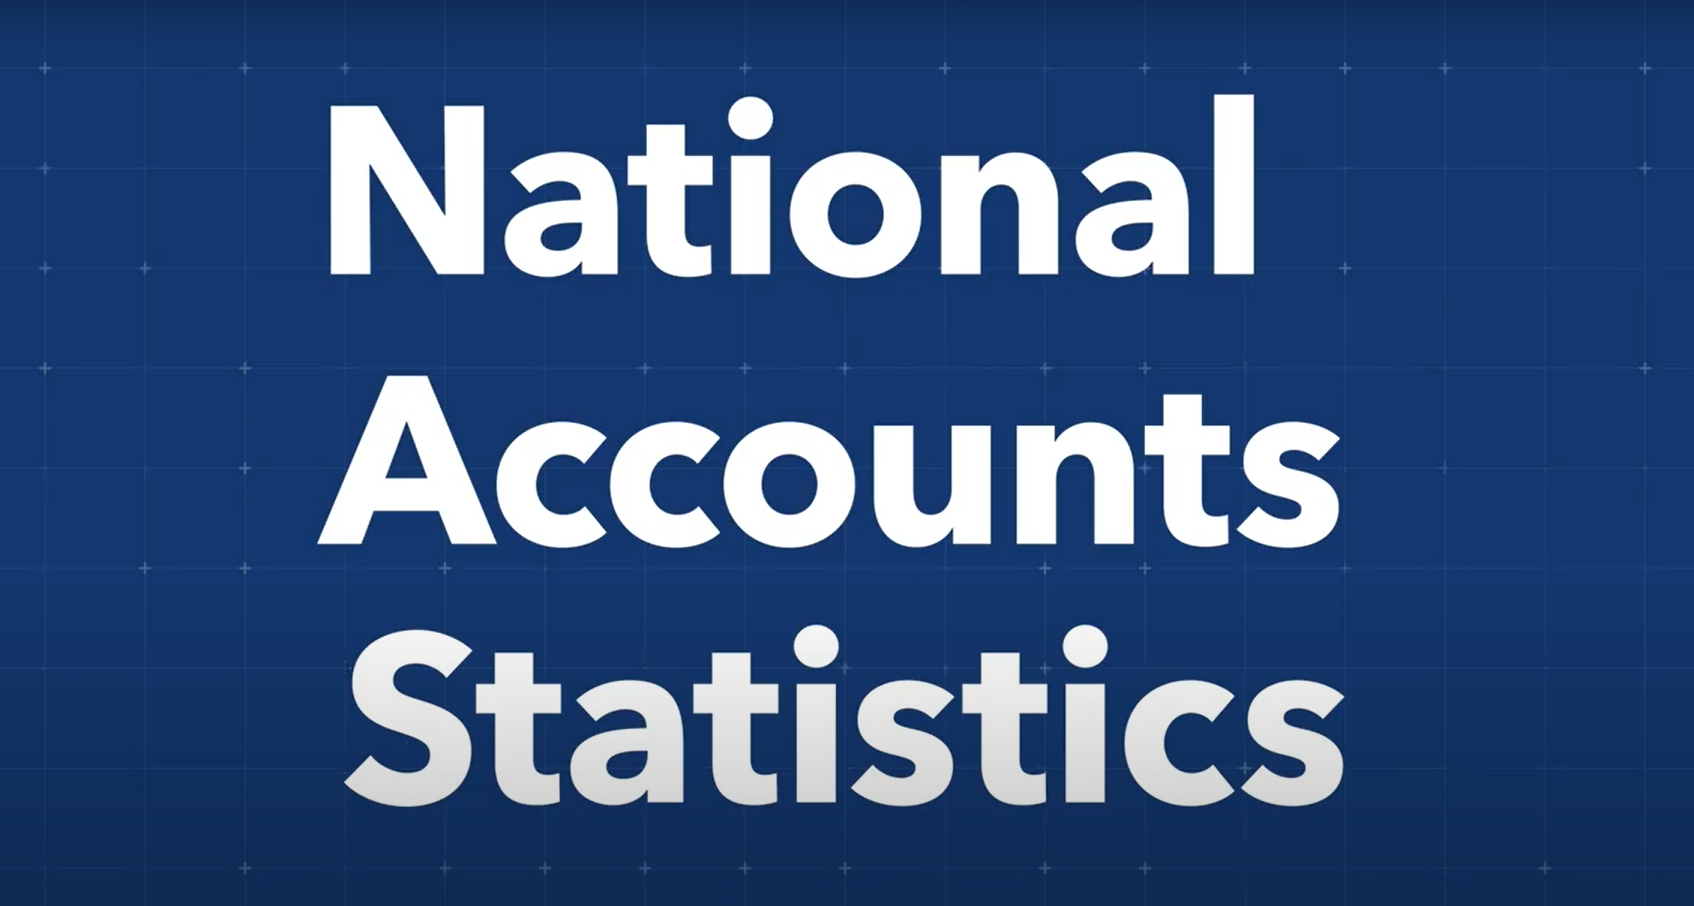 National Accounts Statistics Online Course